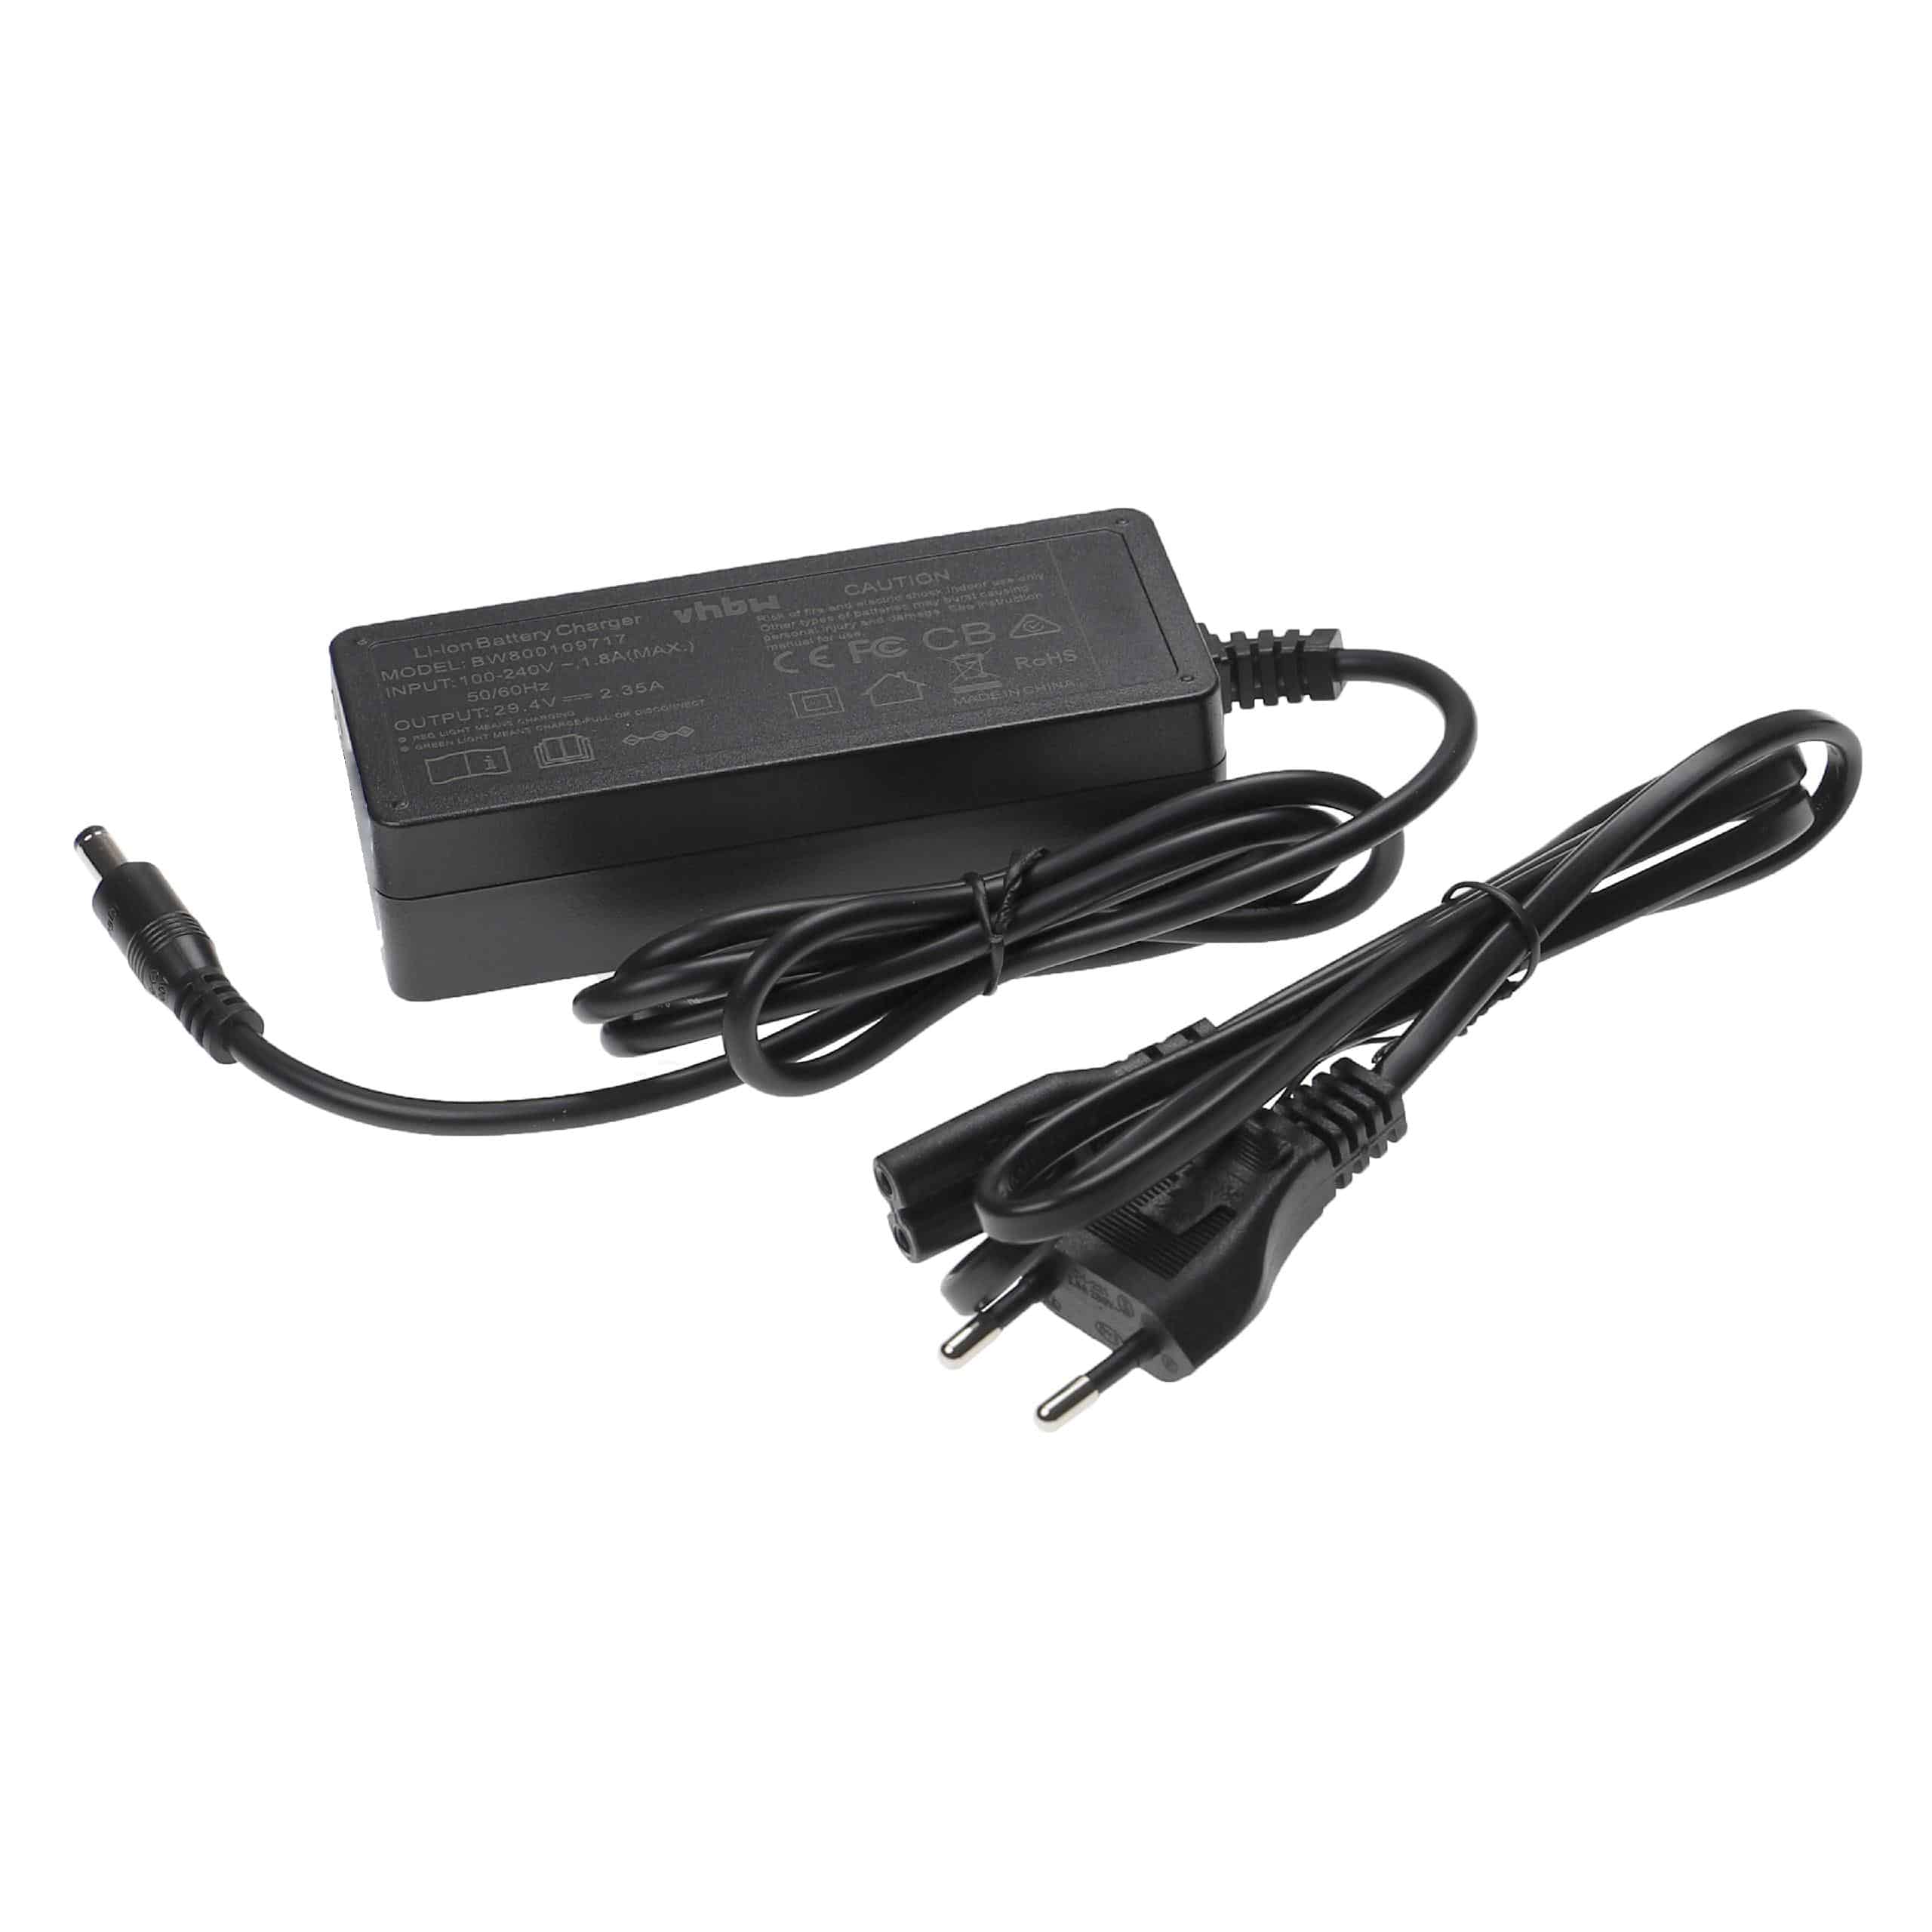 Charger suitable for E-Bike Battery - For 24 V Batteries, With Round Plug, 2.35 A